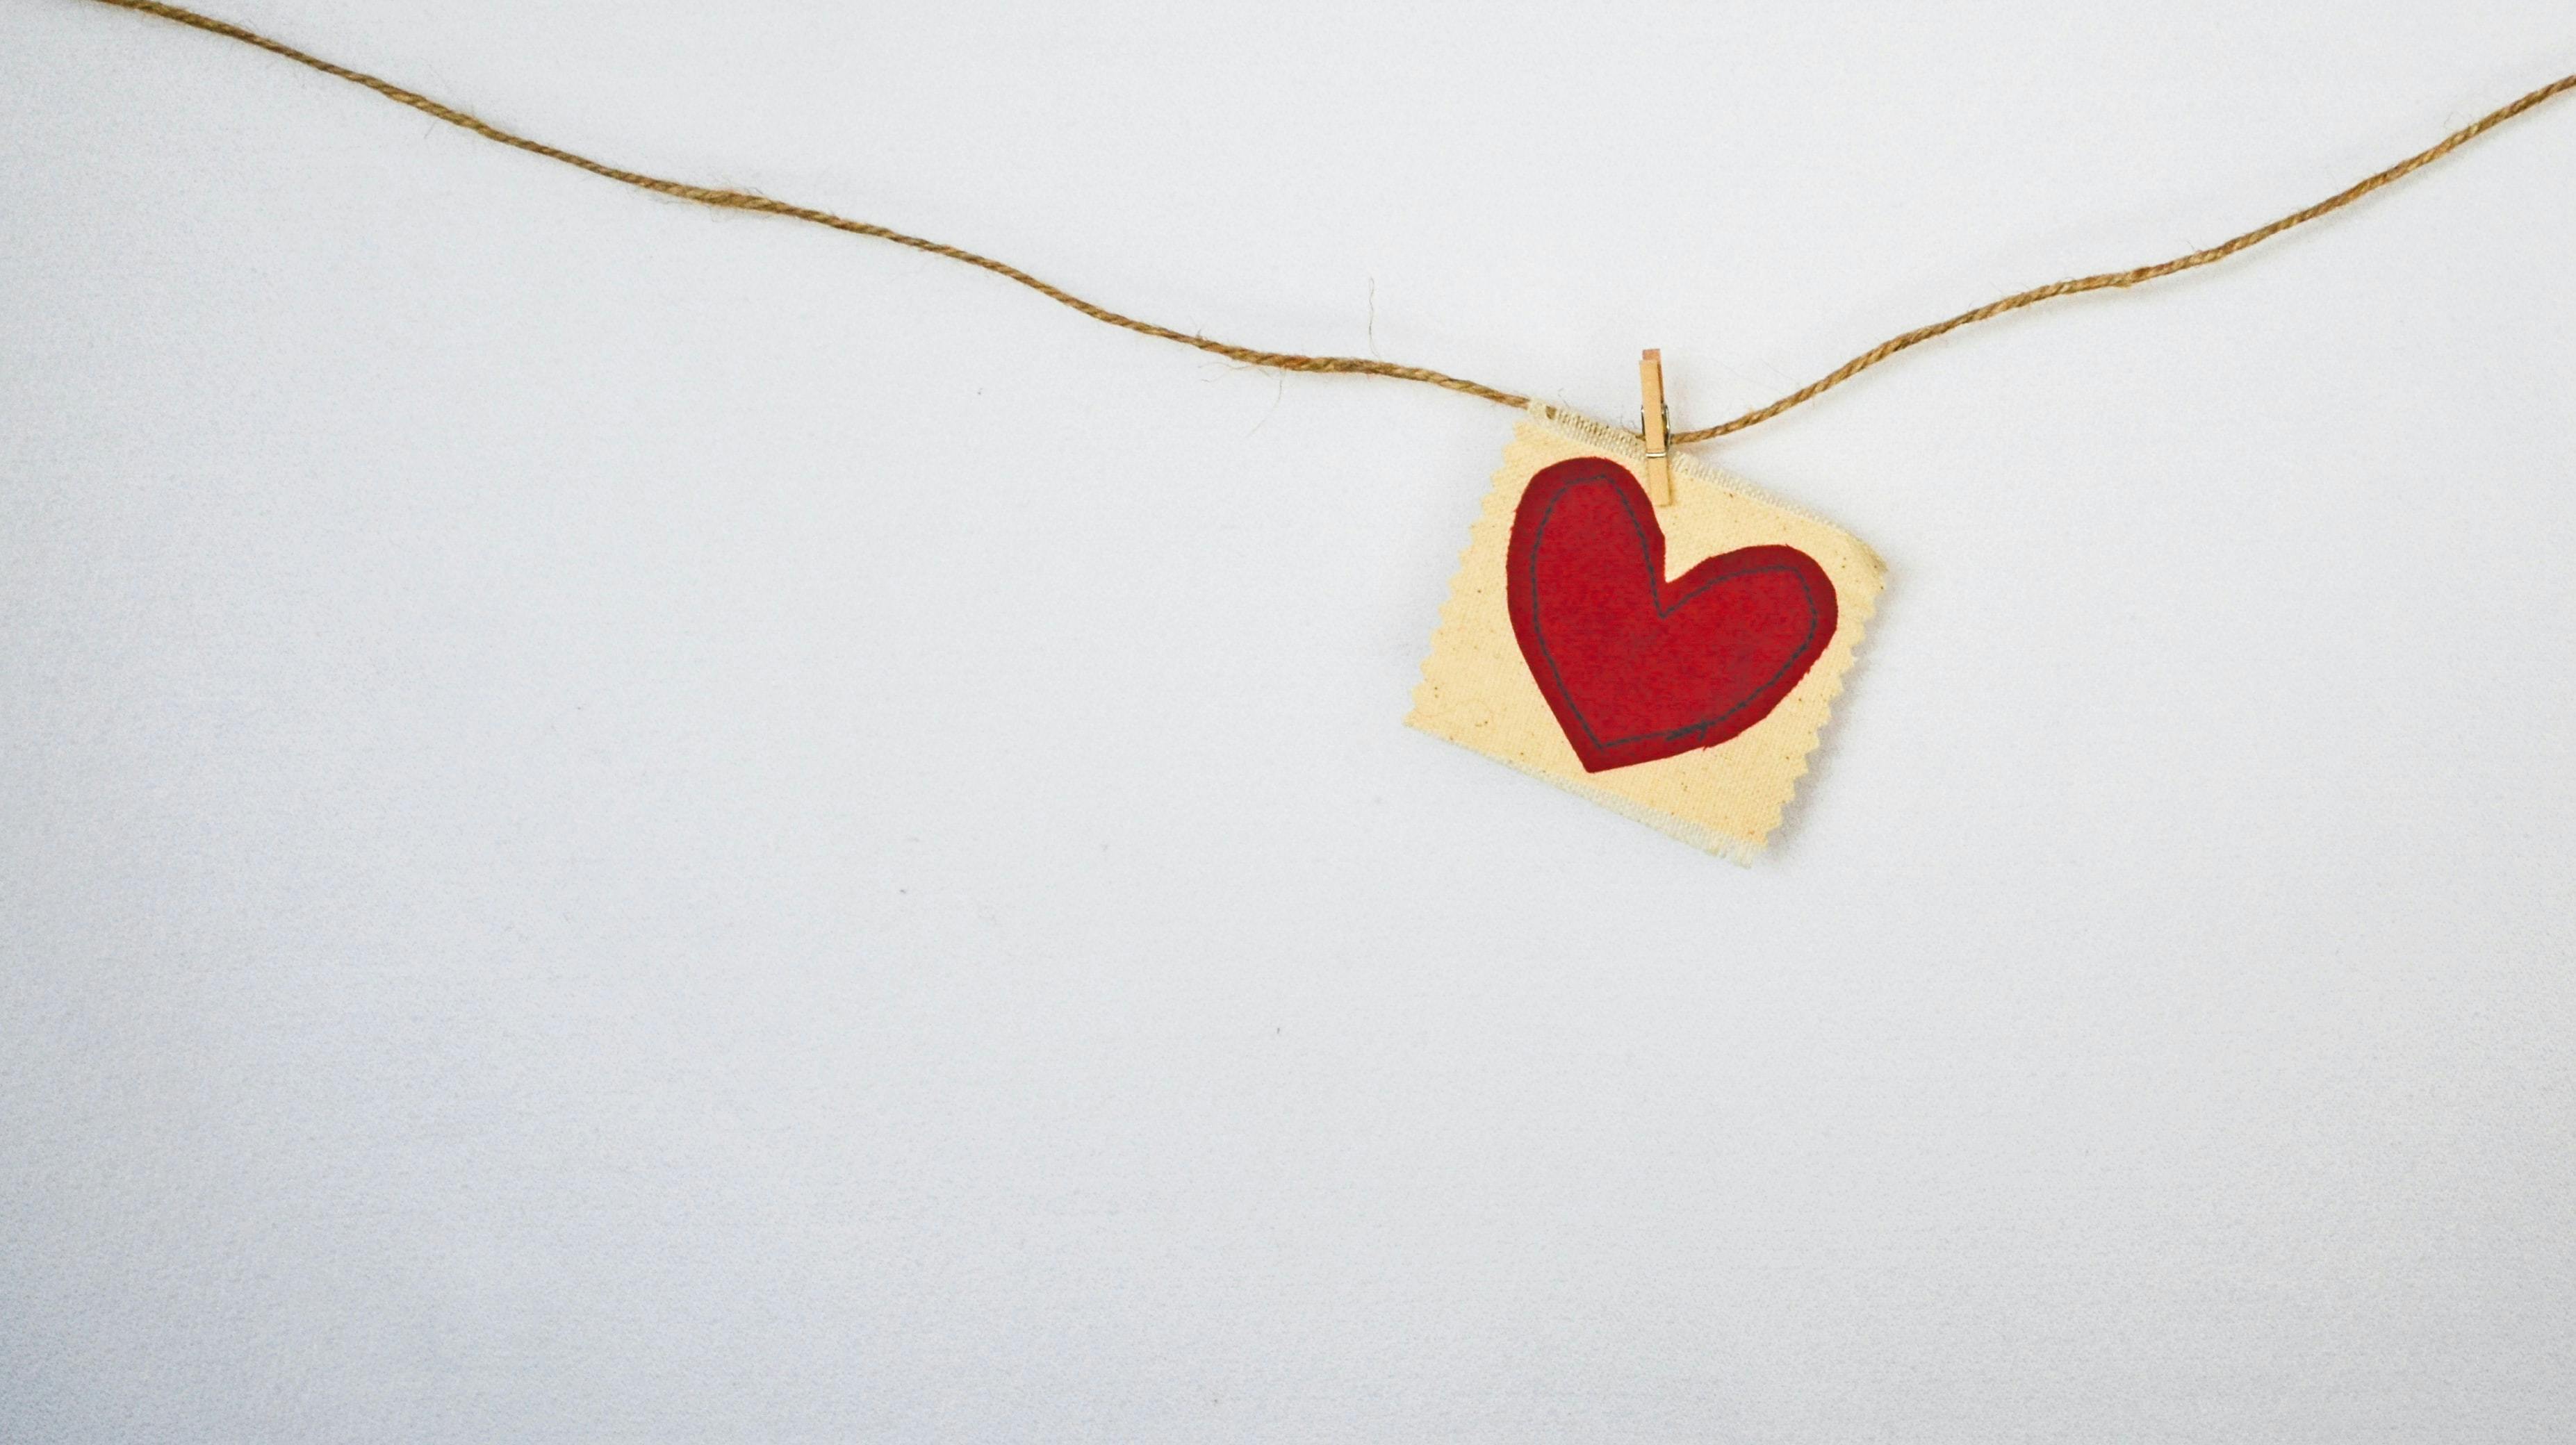 Red fabric heart on string, white background